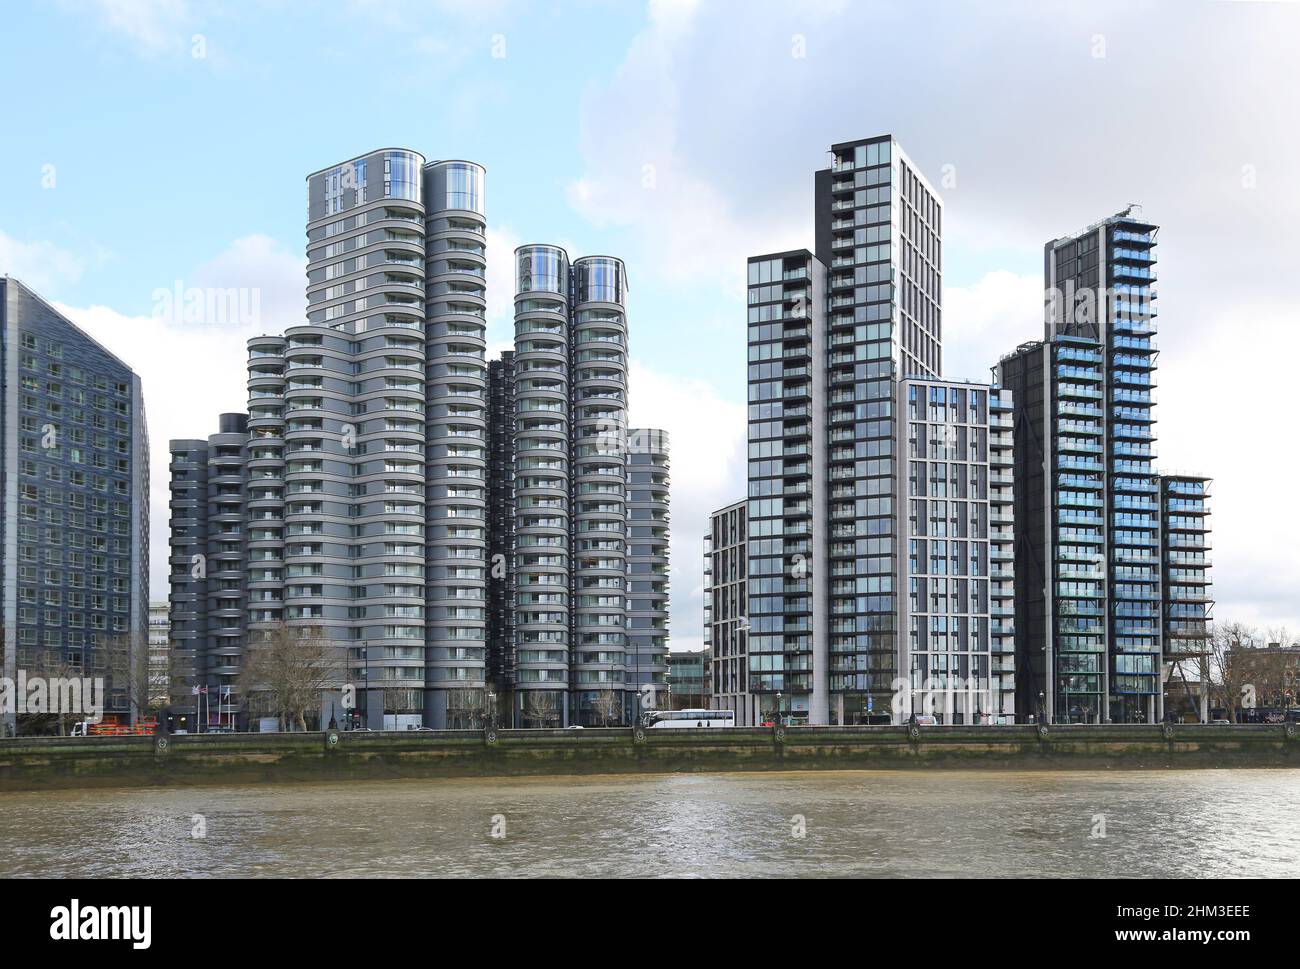 New apartment blocks on London's Albert Embankment. Includes The Corniche by Foster + Partners (left) and Merano Residences by Richard Rogers (right). Stock Photo